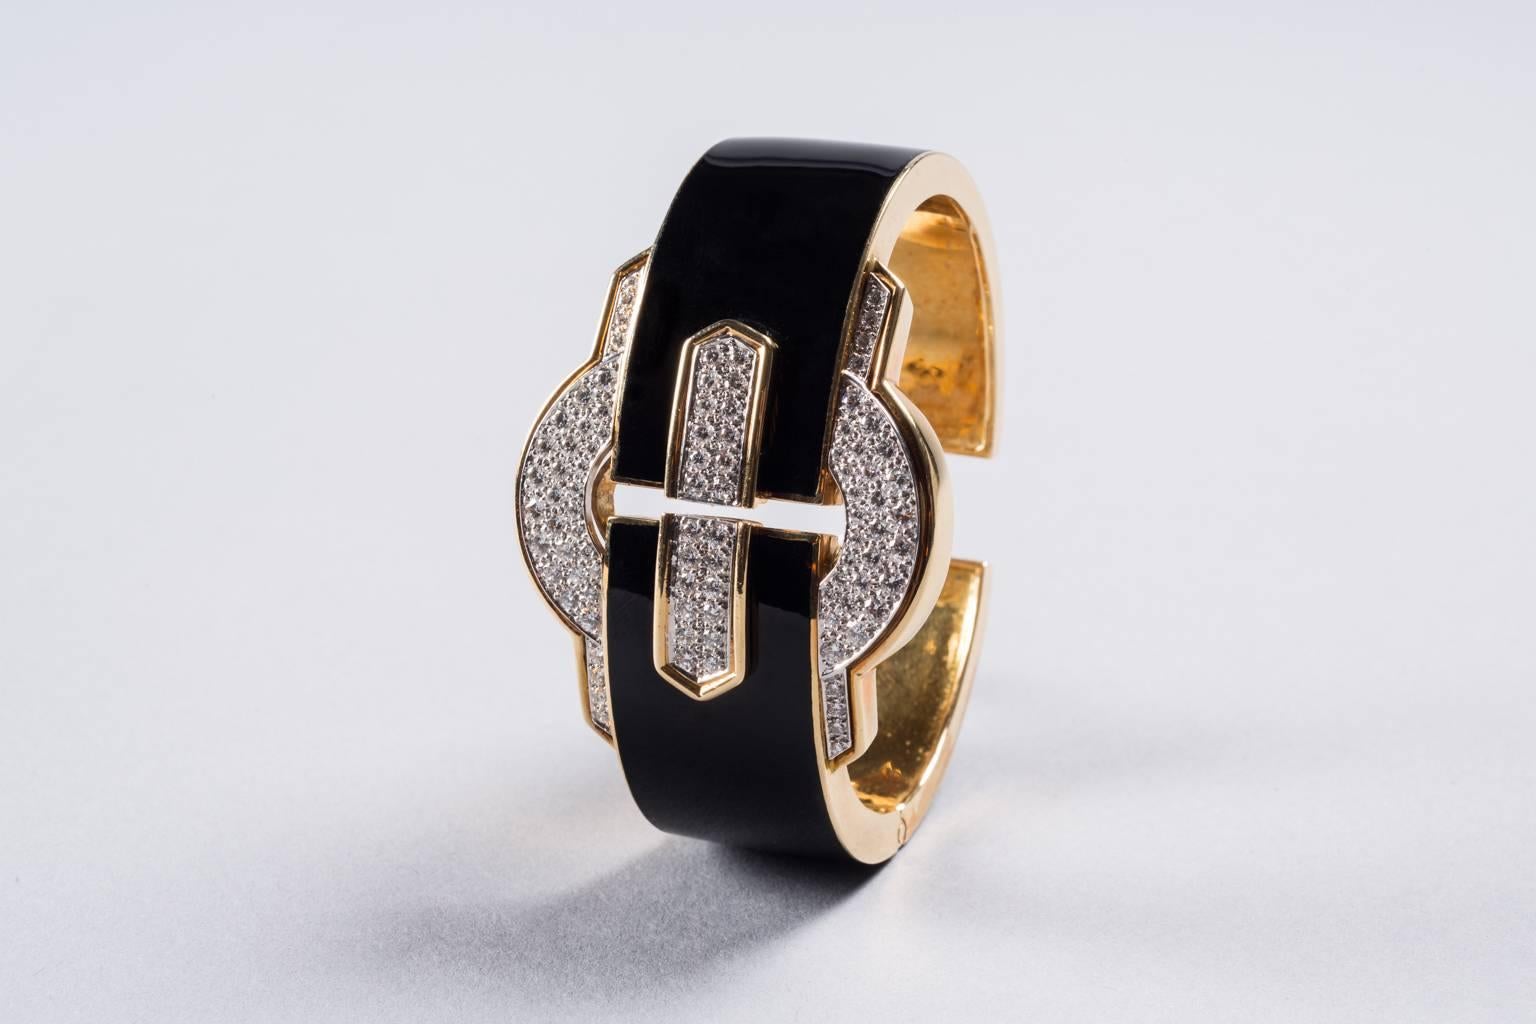 David Webb diamond, 18k gold, platinum and enamel bracelet with hinged cuff.

USA, ca. 1970s
Stamped {David Webb}

Weight: 2.45 carats [F-G, VS2] 95.1 grams

Measures: 2.2 x 1.6 inches inside diameter.

